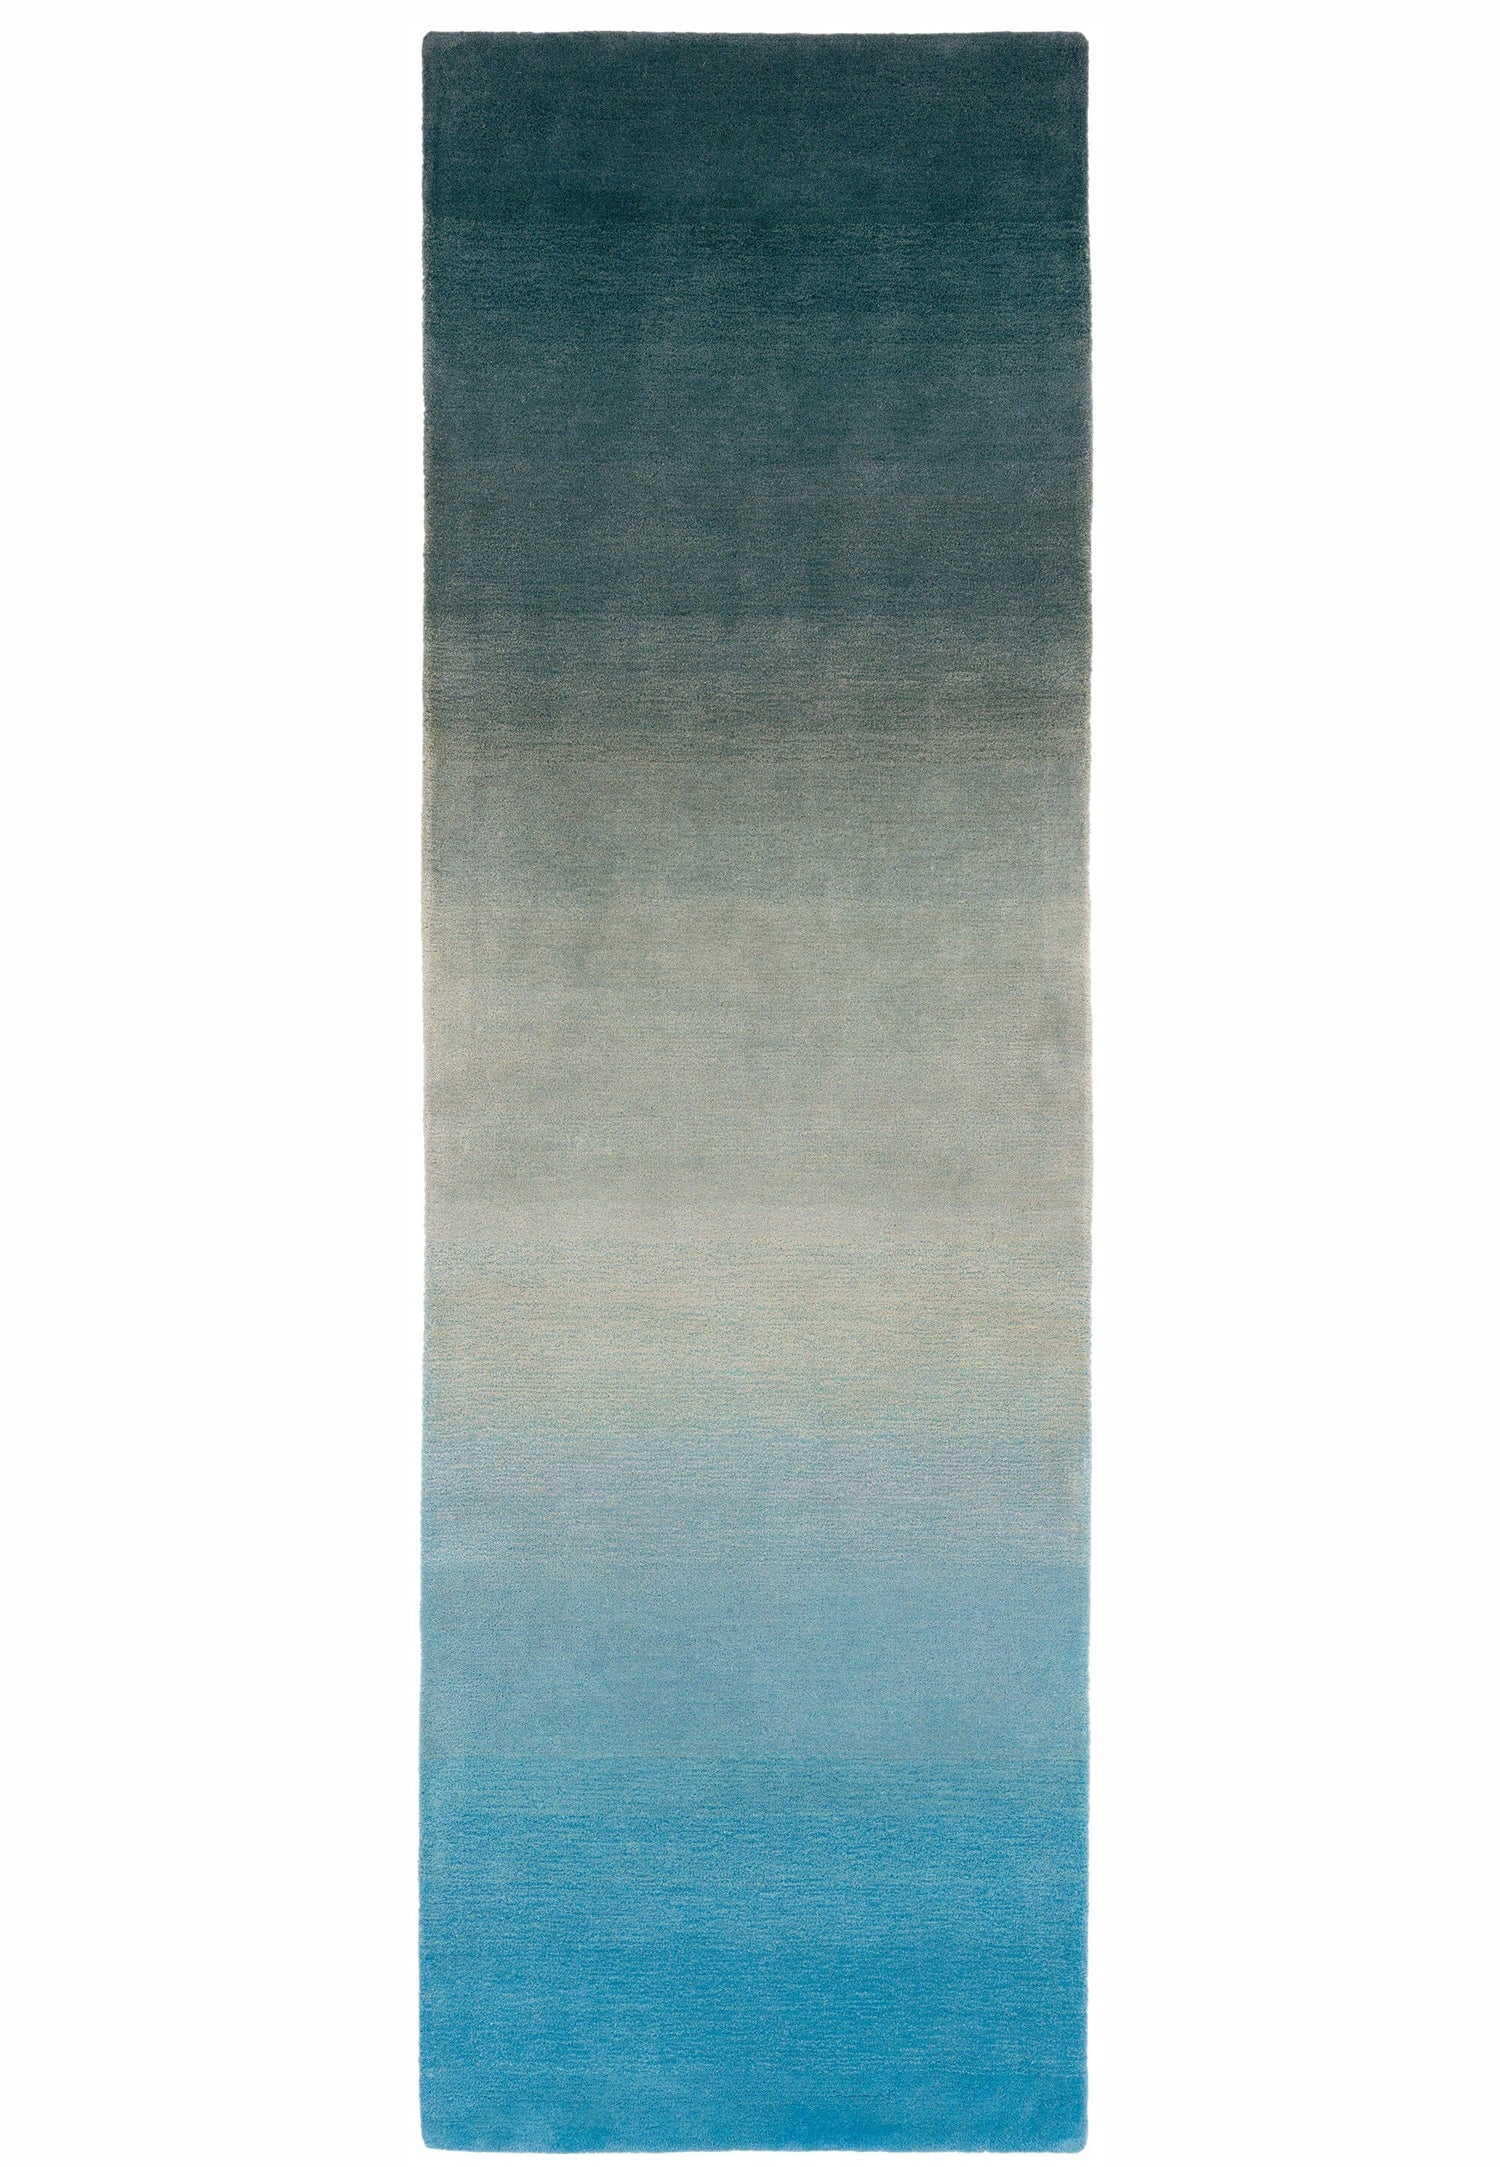  Asiatic Carpets-Asiatic Carpets Ombre Hand Tufted Runner Blue - 70 x 240cm-Blue 373 